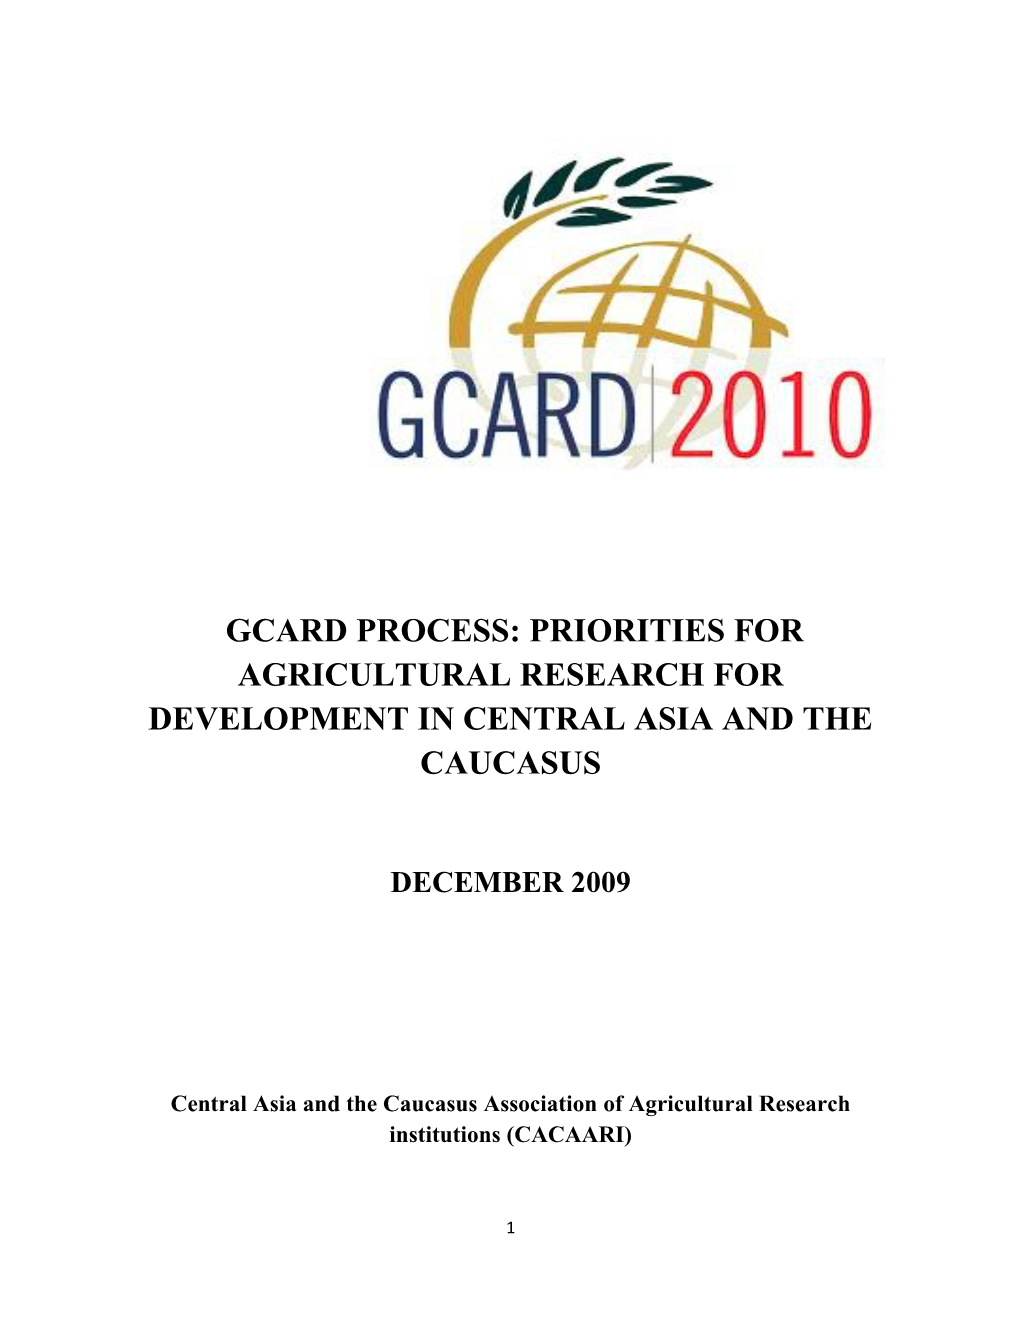 Central Asia and the Caucasus Association of Agricultural Research Institutions (CACAARI)